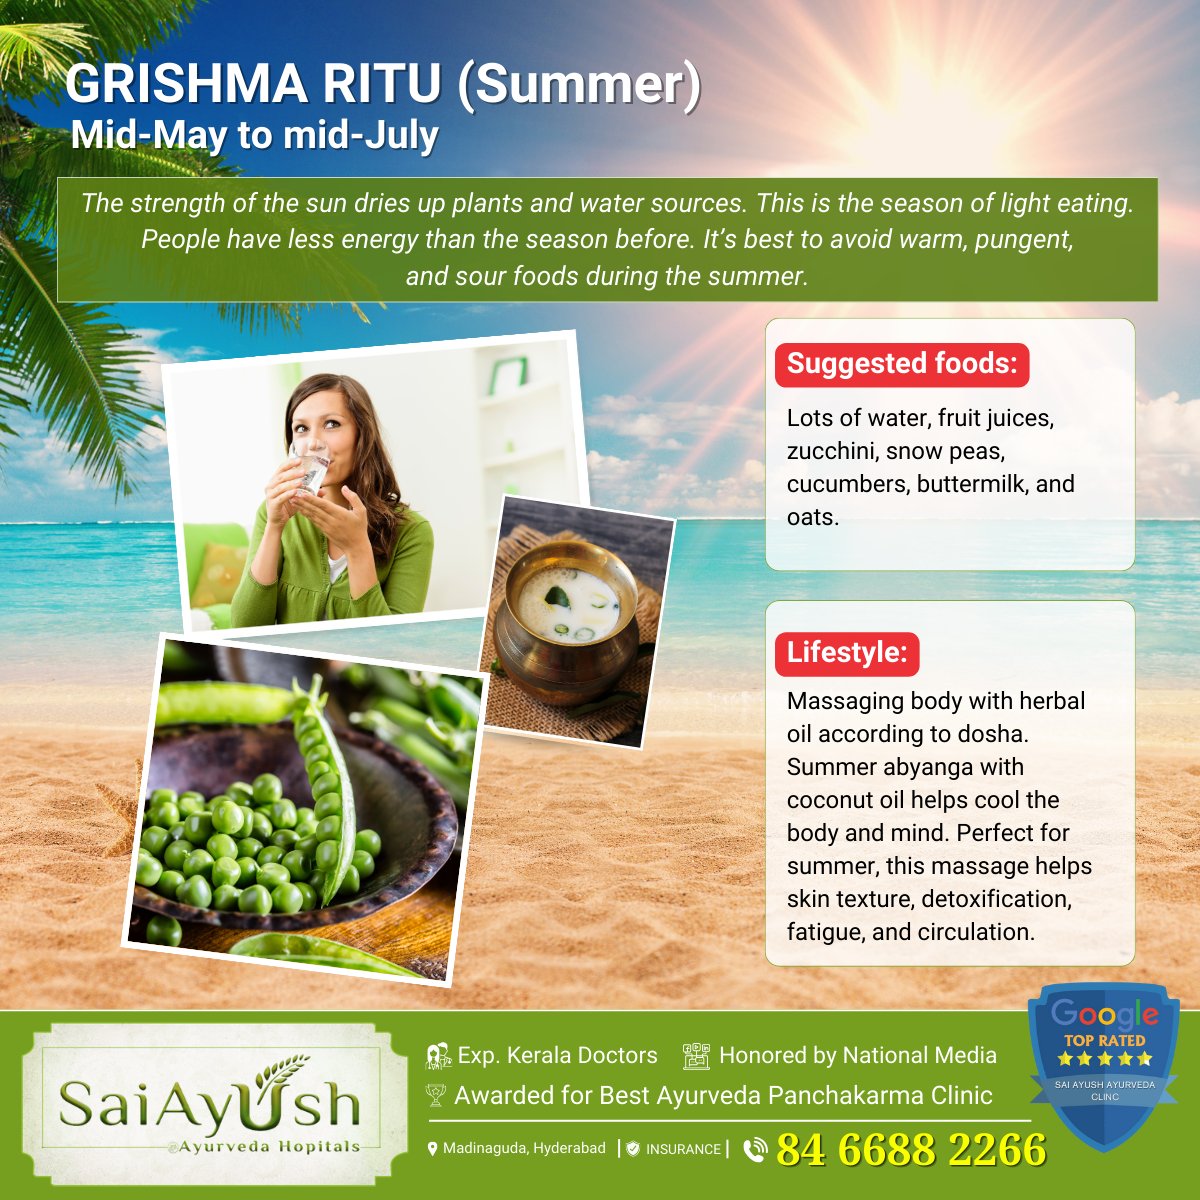 🌞GRISHMA RITU (Summer) The strength of the sun dries up plants and water sources. This is the season of light eating. People have less energy than the season before. It’s best to avoid warm, pungent, and sour foods during the summer. #summer #tips #ayurveda #ayurvedatips